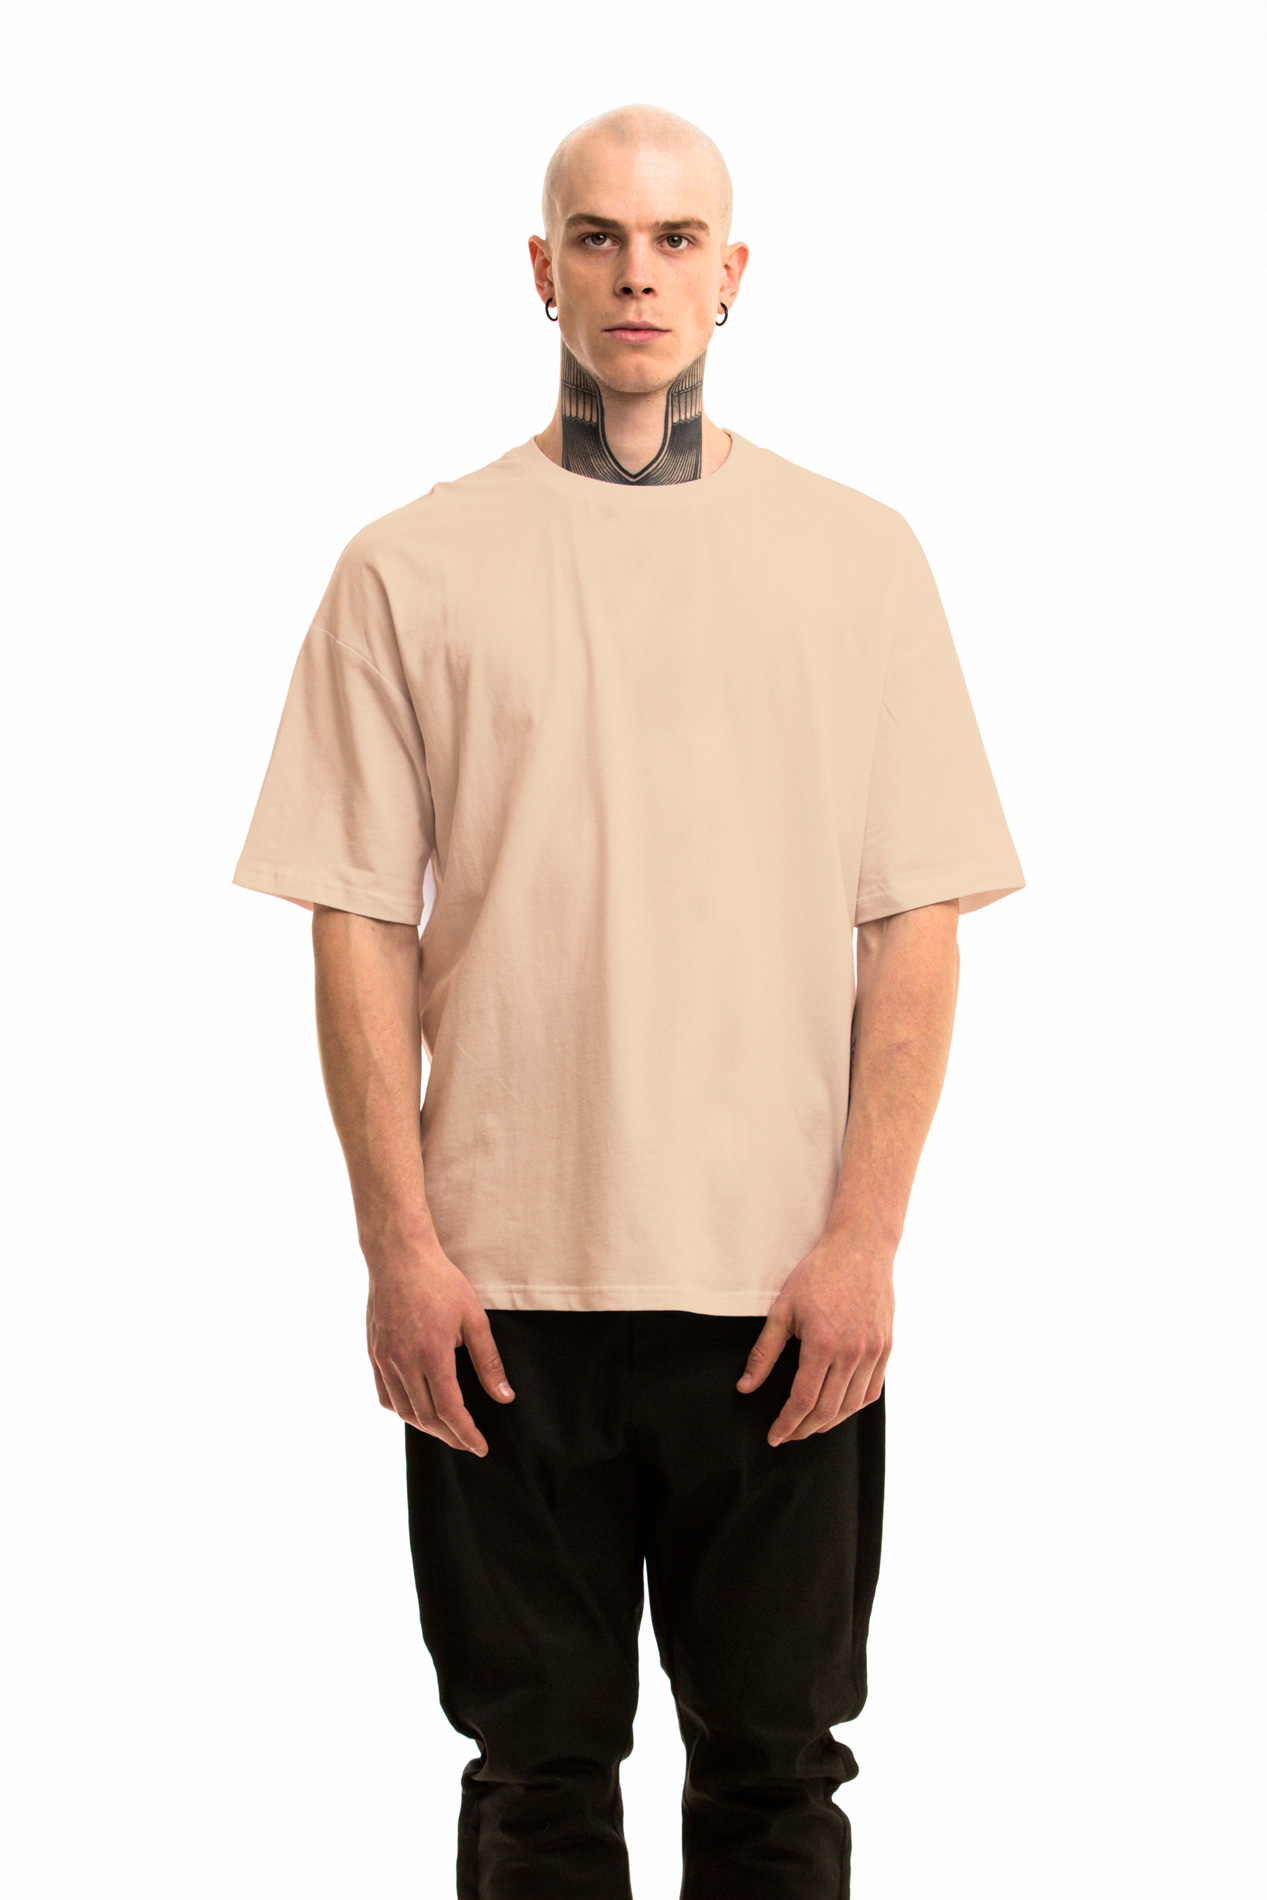 Medewerker succes grafiek White oversize t-shirt by FINCH: worldwide shipping for 3 to 14 days